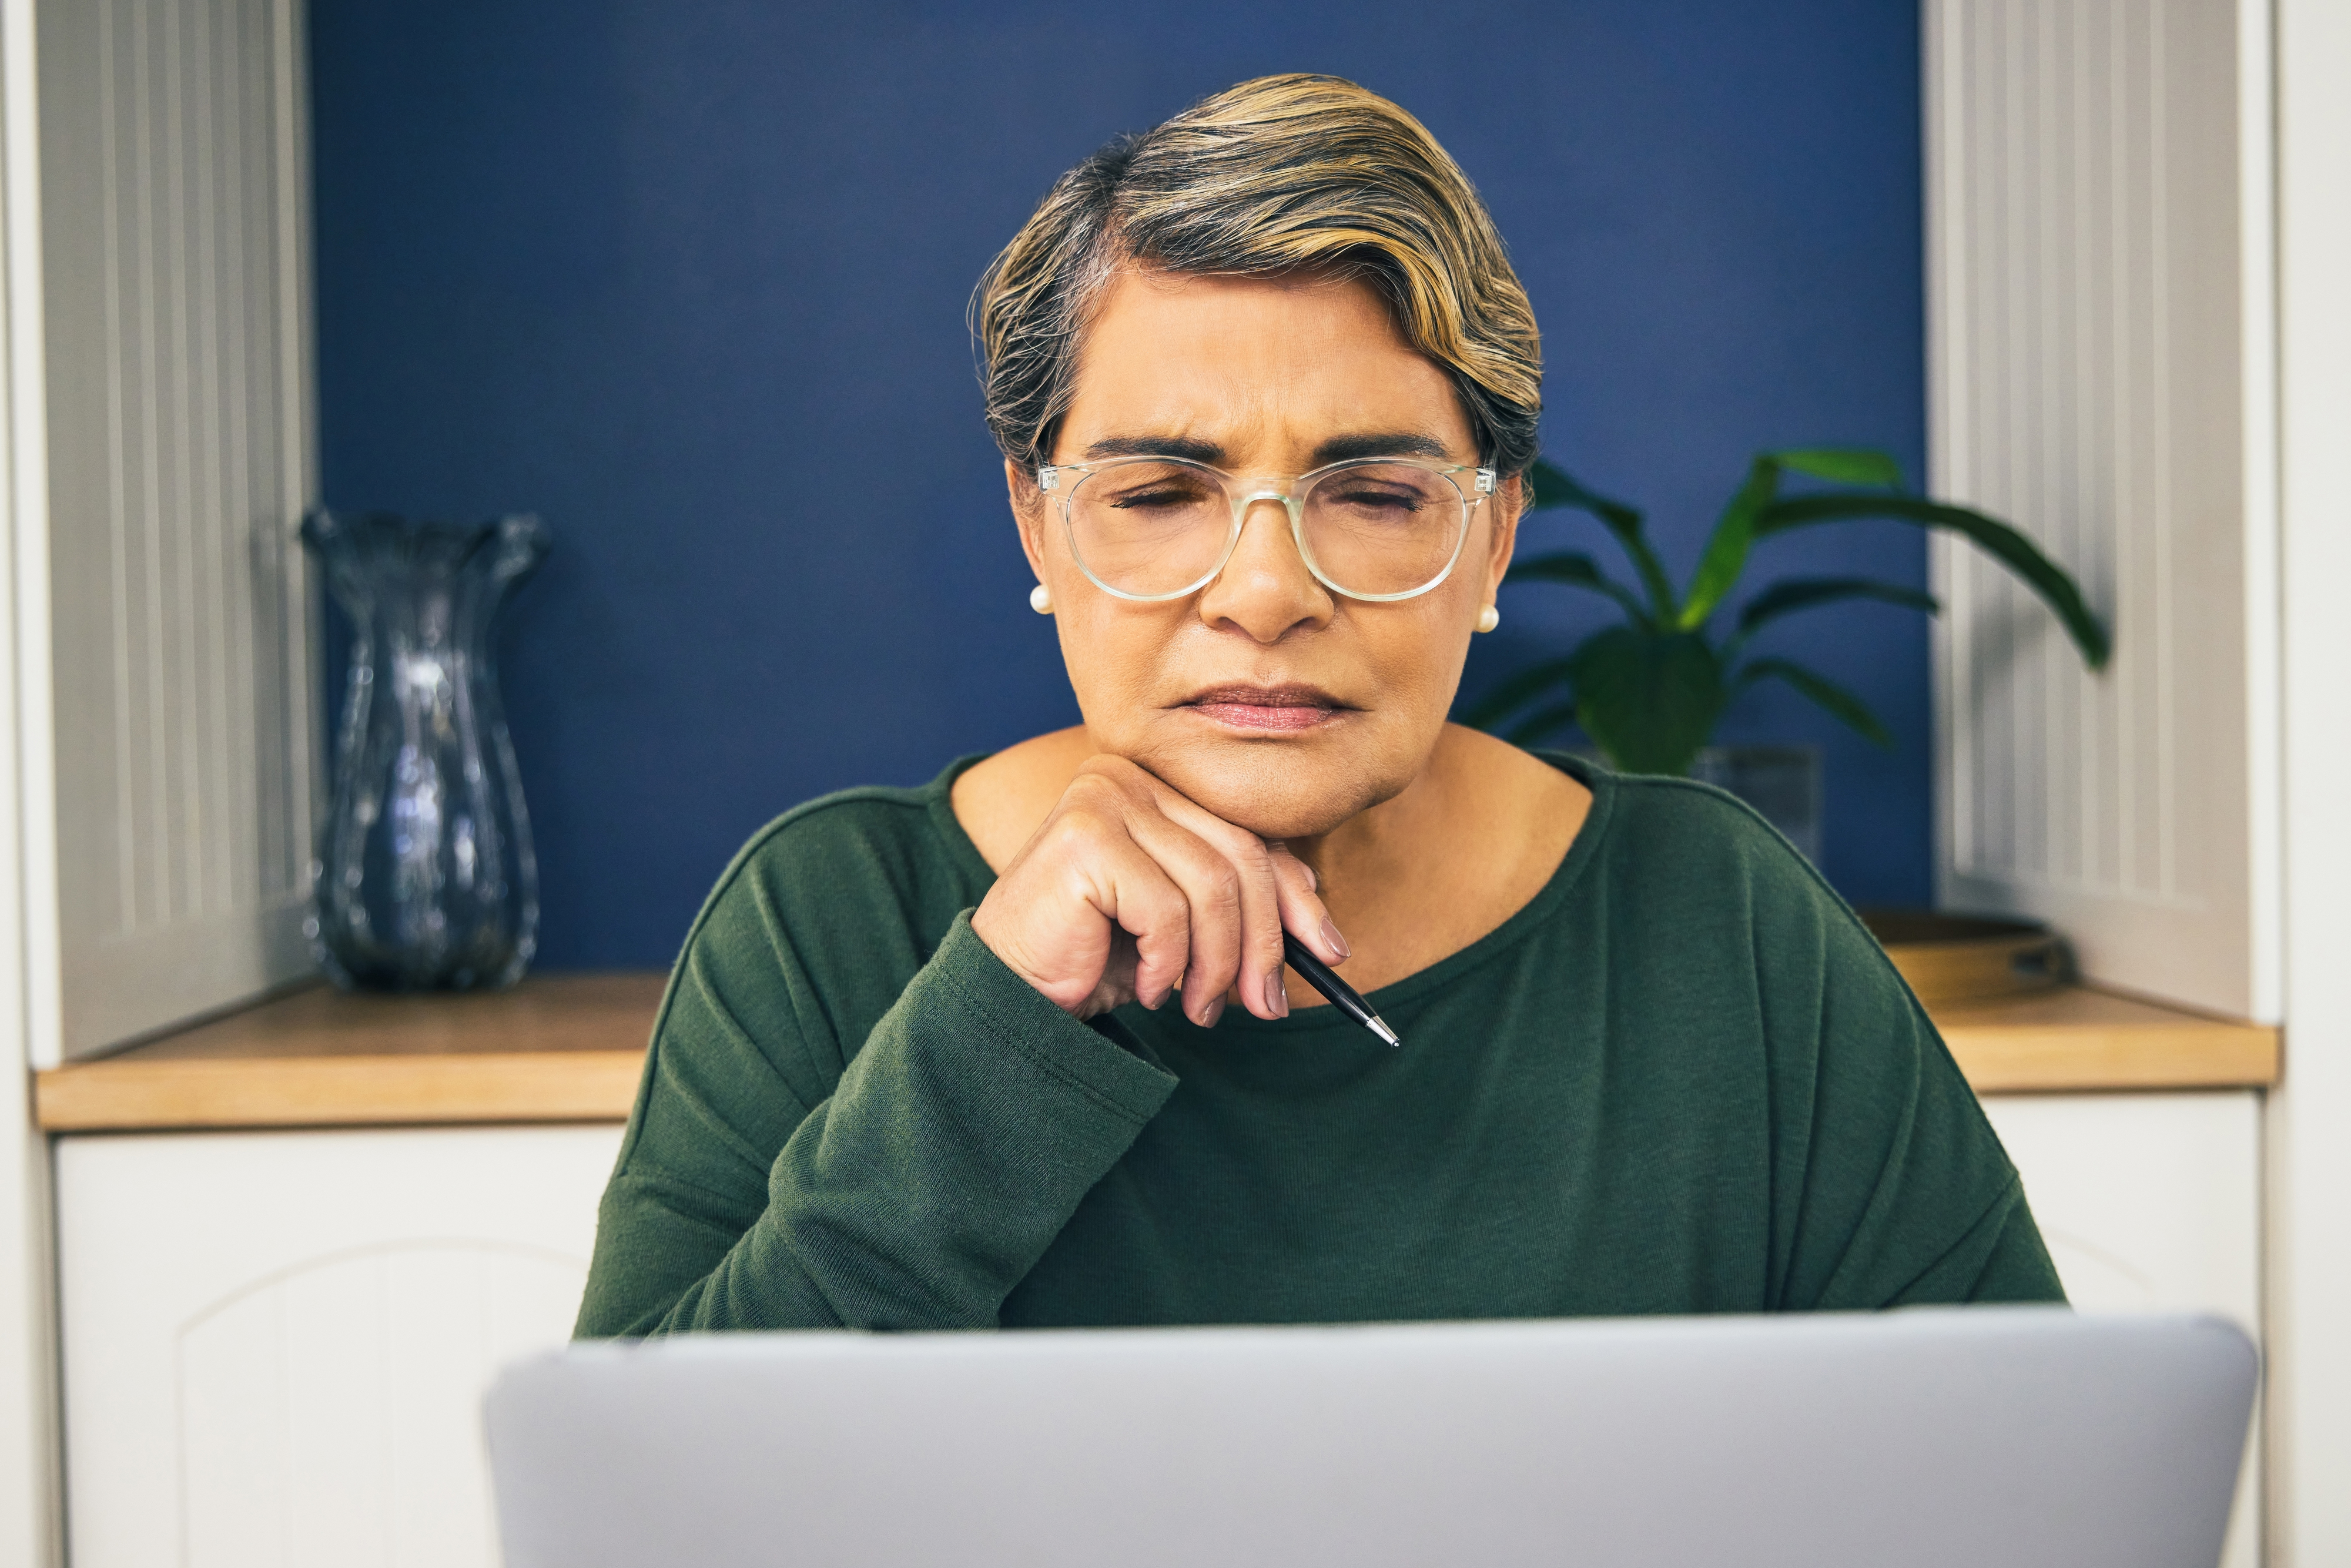 Person at a laptop appears contemplative or focused, resting chin on hand, wearing glasses and a top